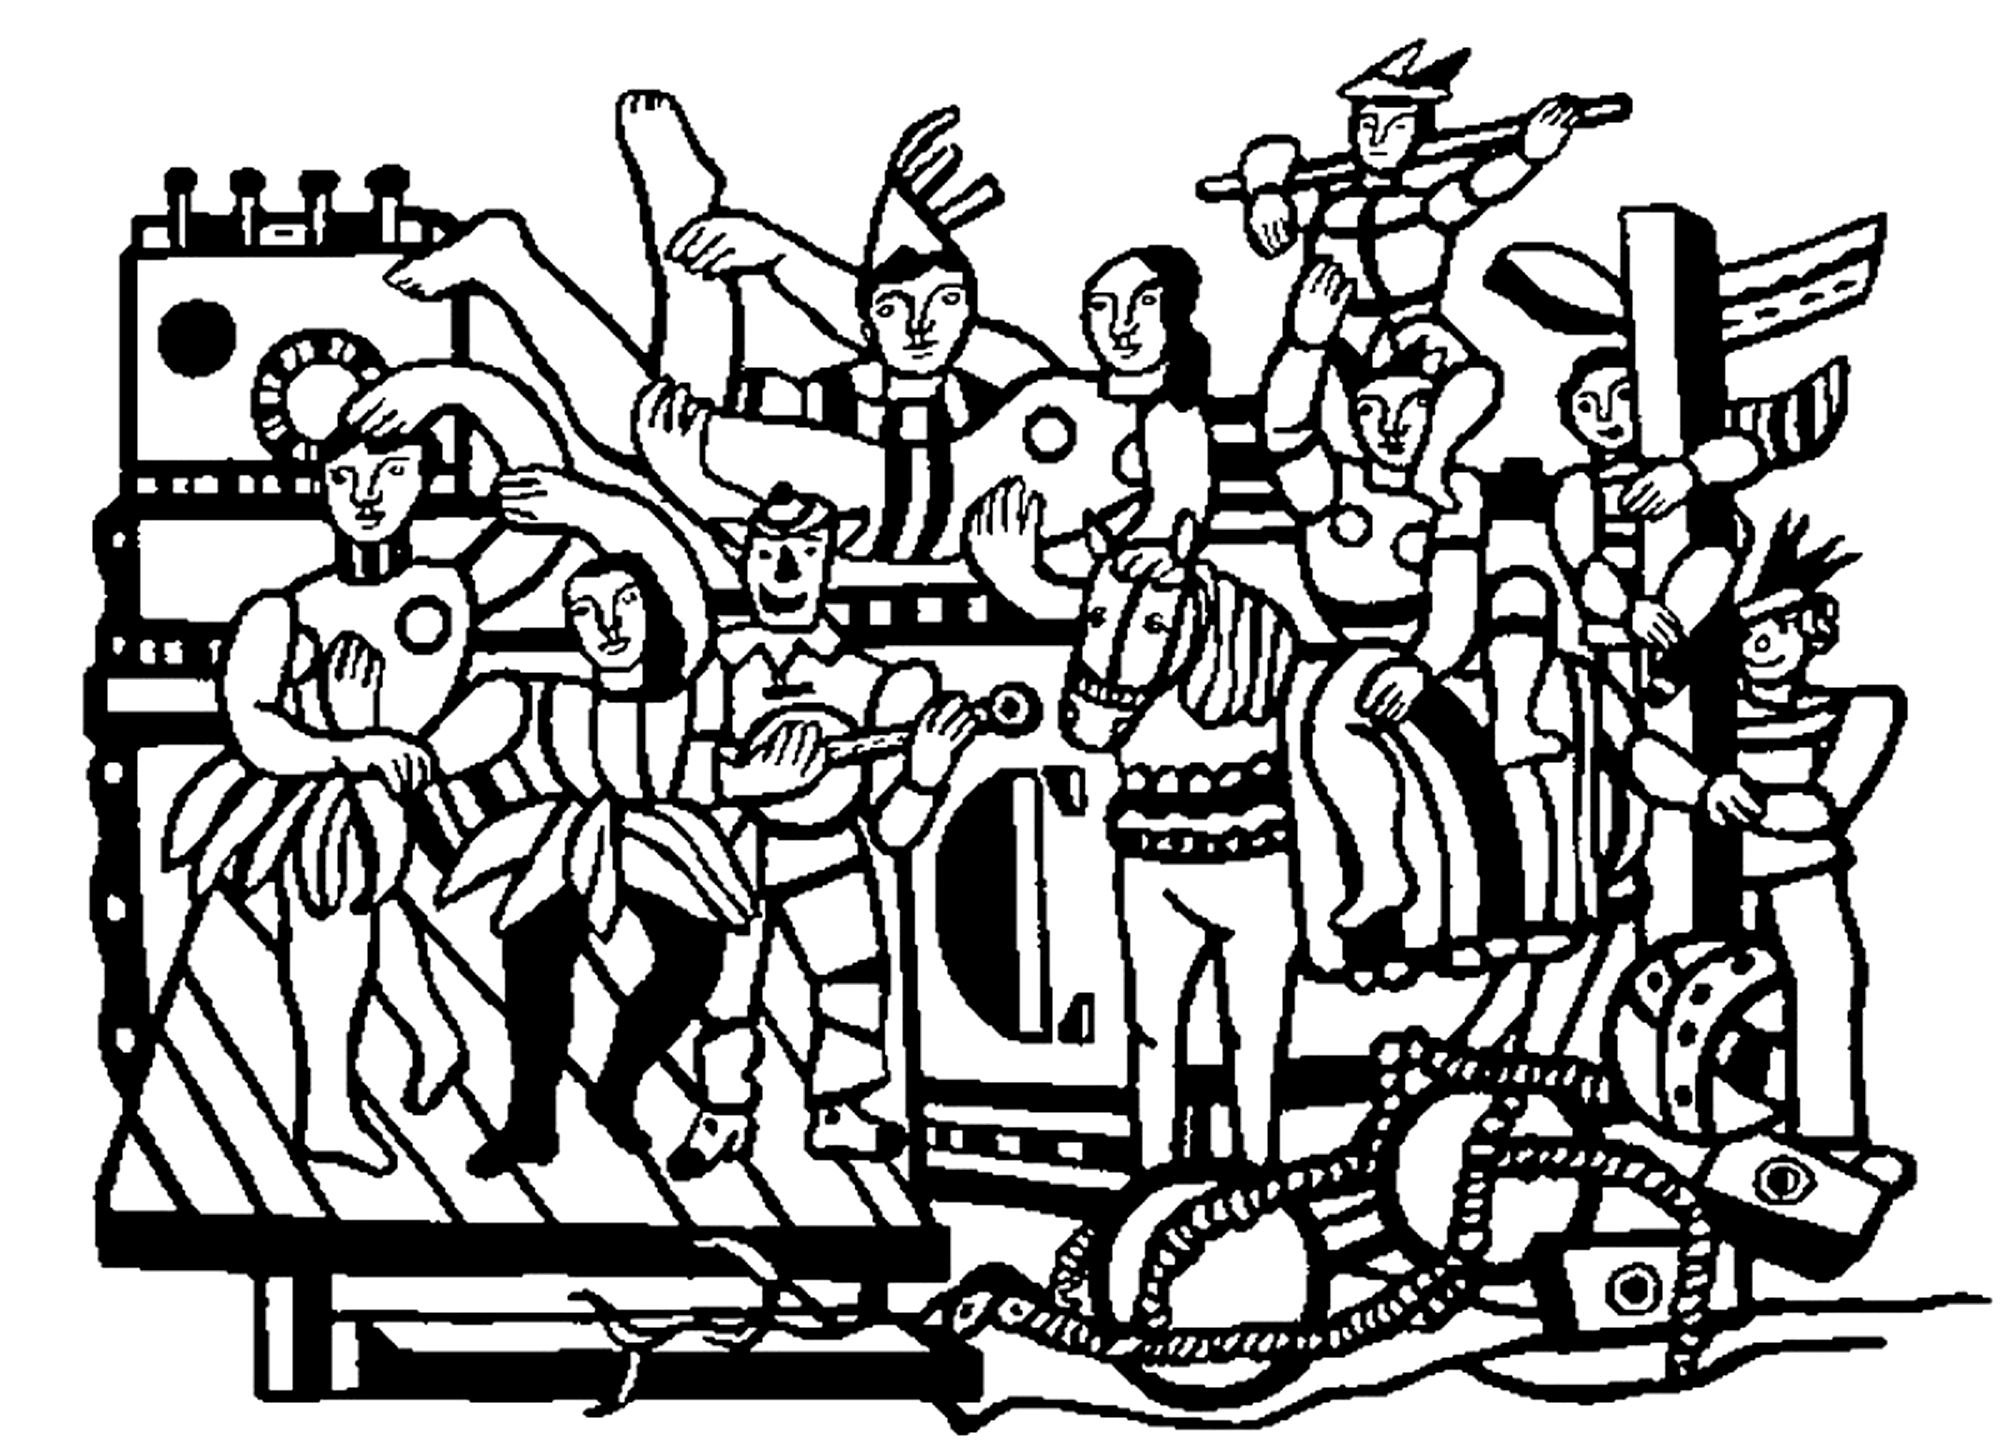 Fernand leger   the great parade - Image with : Fernand Leger